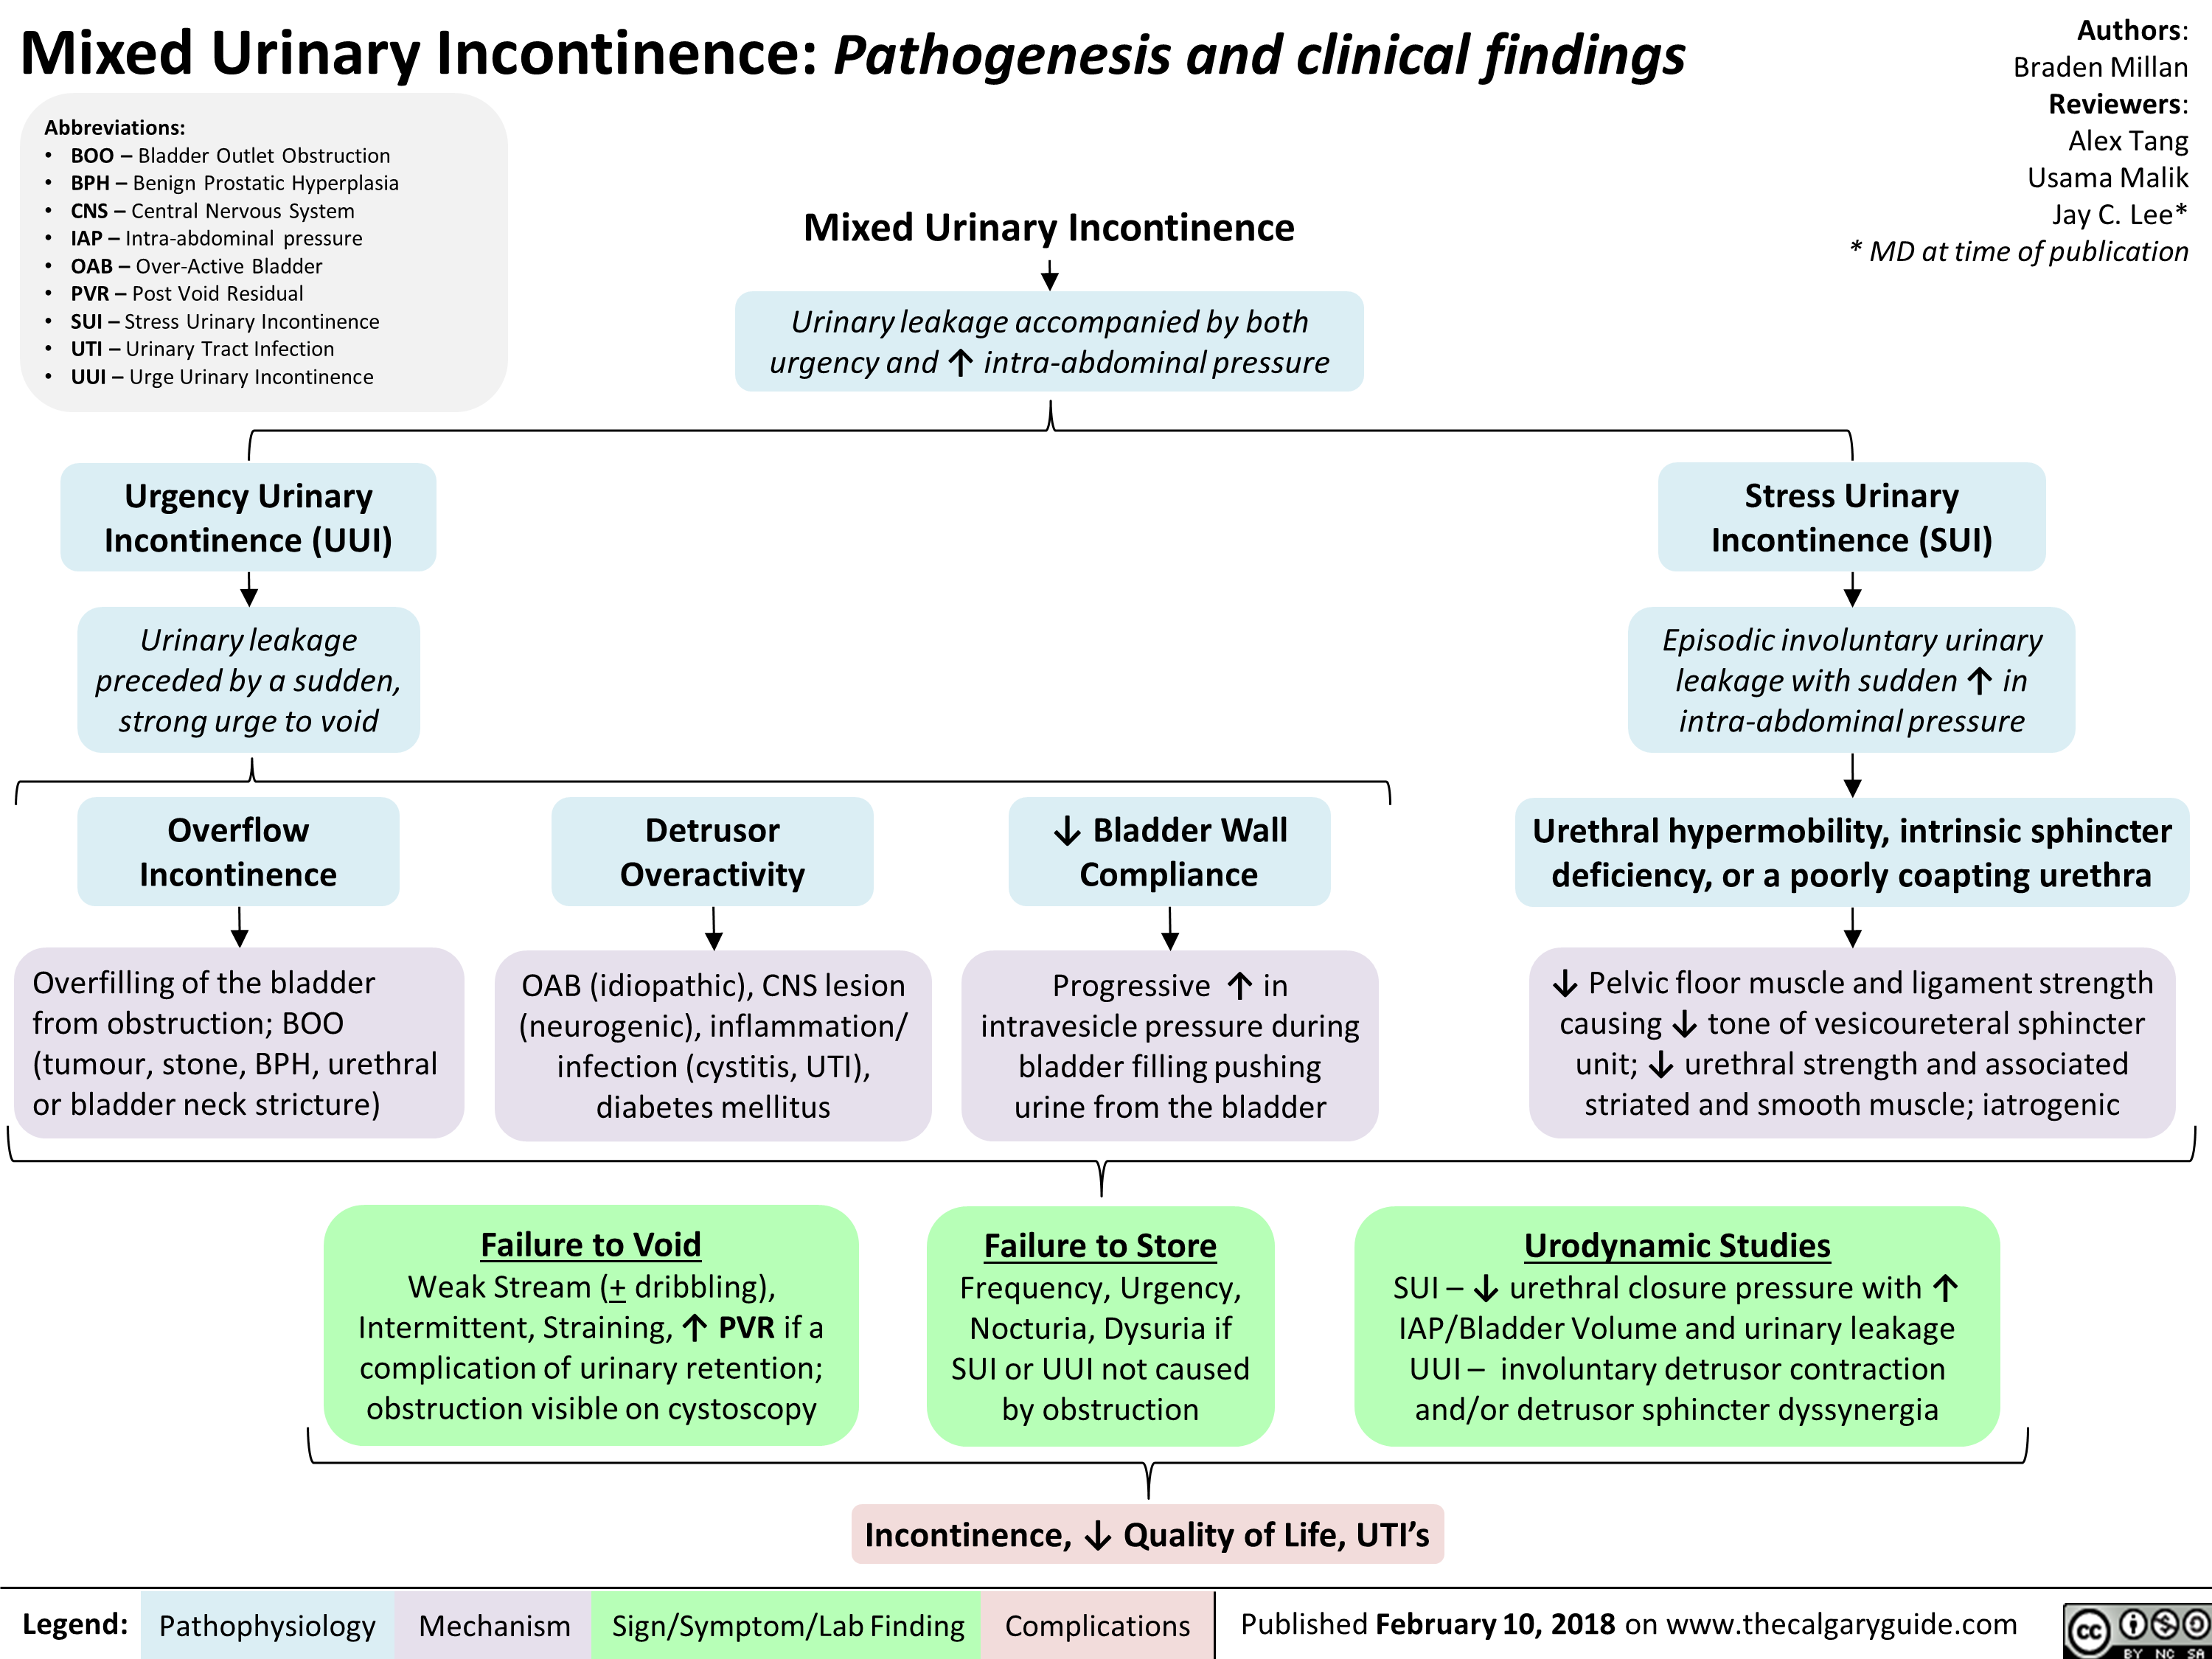 Mixed Urinary Incontinence: Pathogenesis and clinical findings 
Abbreviations: • BOO — Bladder Outlet Obstruction • BPH — Benign Prostatic Hyperplasia • CNS — Central Nervous System • IAP — Intra-abdominal pressure • OAB — Over-Active Bladder • PVR — Post Void Residual • SUI —Stress Urinary Incontinence • UTI — Urinary Tract Infection • UUI — Urge Urinary Incontinence 
Mixed Urinary Incontinence 47 
Urinary leakage accompanied by both urgency and t intra-abdominal pressure 
Urgency Urinary Incontinence (UUI) 4, Urinary leakage preceded by a sudden, strong urge to void 
Overflow Incontinence vir Overfilling of the bladder from obstruction; BOO (tumour, stone, BPH, urethral or bladder neck stricture) 
Detrusor Overactivity Ilr OAB (idiopathic), CNS lesion (neurogenic), inflammation/ infection (cystitis, UTI), diabetes mellitus 
4. Bladder Wall Compliance 
Progressive t in intravesicle pressure during bladder filling pushing urine from the bladder 
Authors: Braden Millan Reviewers: Alex Tang Usama Malik Jay C. Lee* * MD at time of publication 
Stress Urinary Incontinence (SUI) + Episodic involuntary urinary leakage with sudden l• in intra-abdominal pressure 
4. 
Urethral hypermobility, intrinsic sphincter deficiency, or a poorly coapting urethra 
4, 
4, Pelvic floor muscle and ligament strength causing 4. tone of vesicoureteral sphincter unit; 4, urethral strength and associated striated and smooth muscle; iatrogenic 
Legend: 
Failure to Void  Weak Stream (+ dribbling), Intermittent, Straining, '1` PVR if a complication of urinary retention; obstruction visible on cystoscopy 
Failure to Store  Frequency, Urgency, Nocturia, Dysuria if SUI or UUI not caused by obstruction 
Pathophysiology Mechanism 
Urodynamic Studies  SUI — 4, urethral closure pressure with 11` IAP/Bladder Volume and urinary leakage UUI — involuntary detrusor contraction and/or detrusor sphincter dyssynergia 

Incontinence, 4, Quality of Life, UTI's 